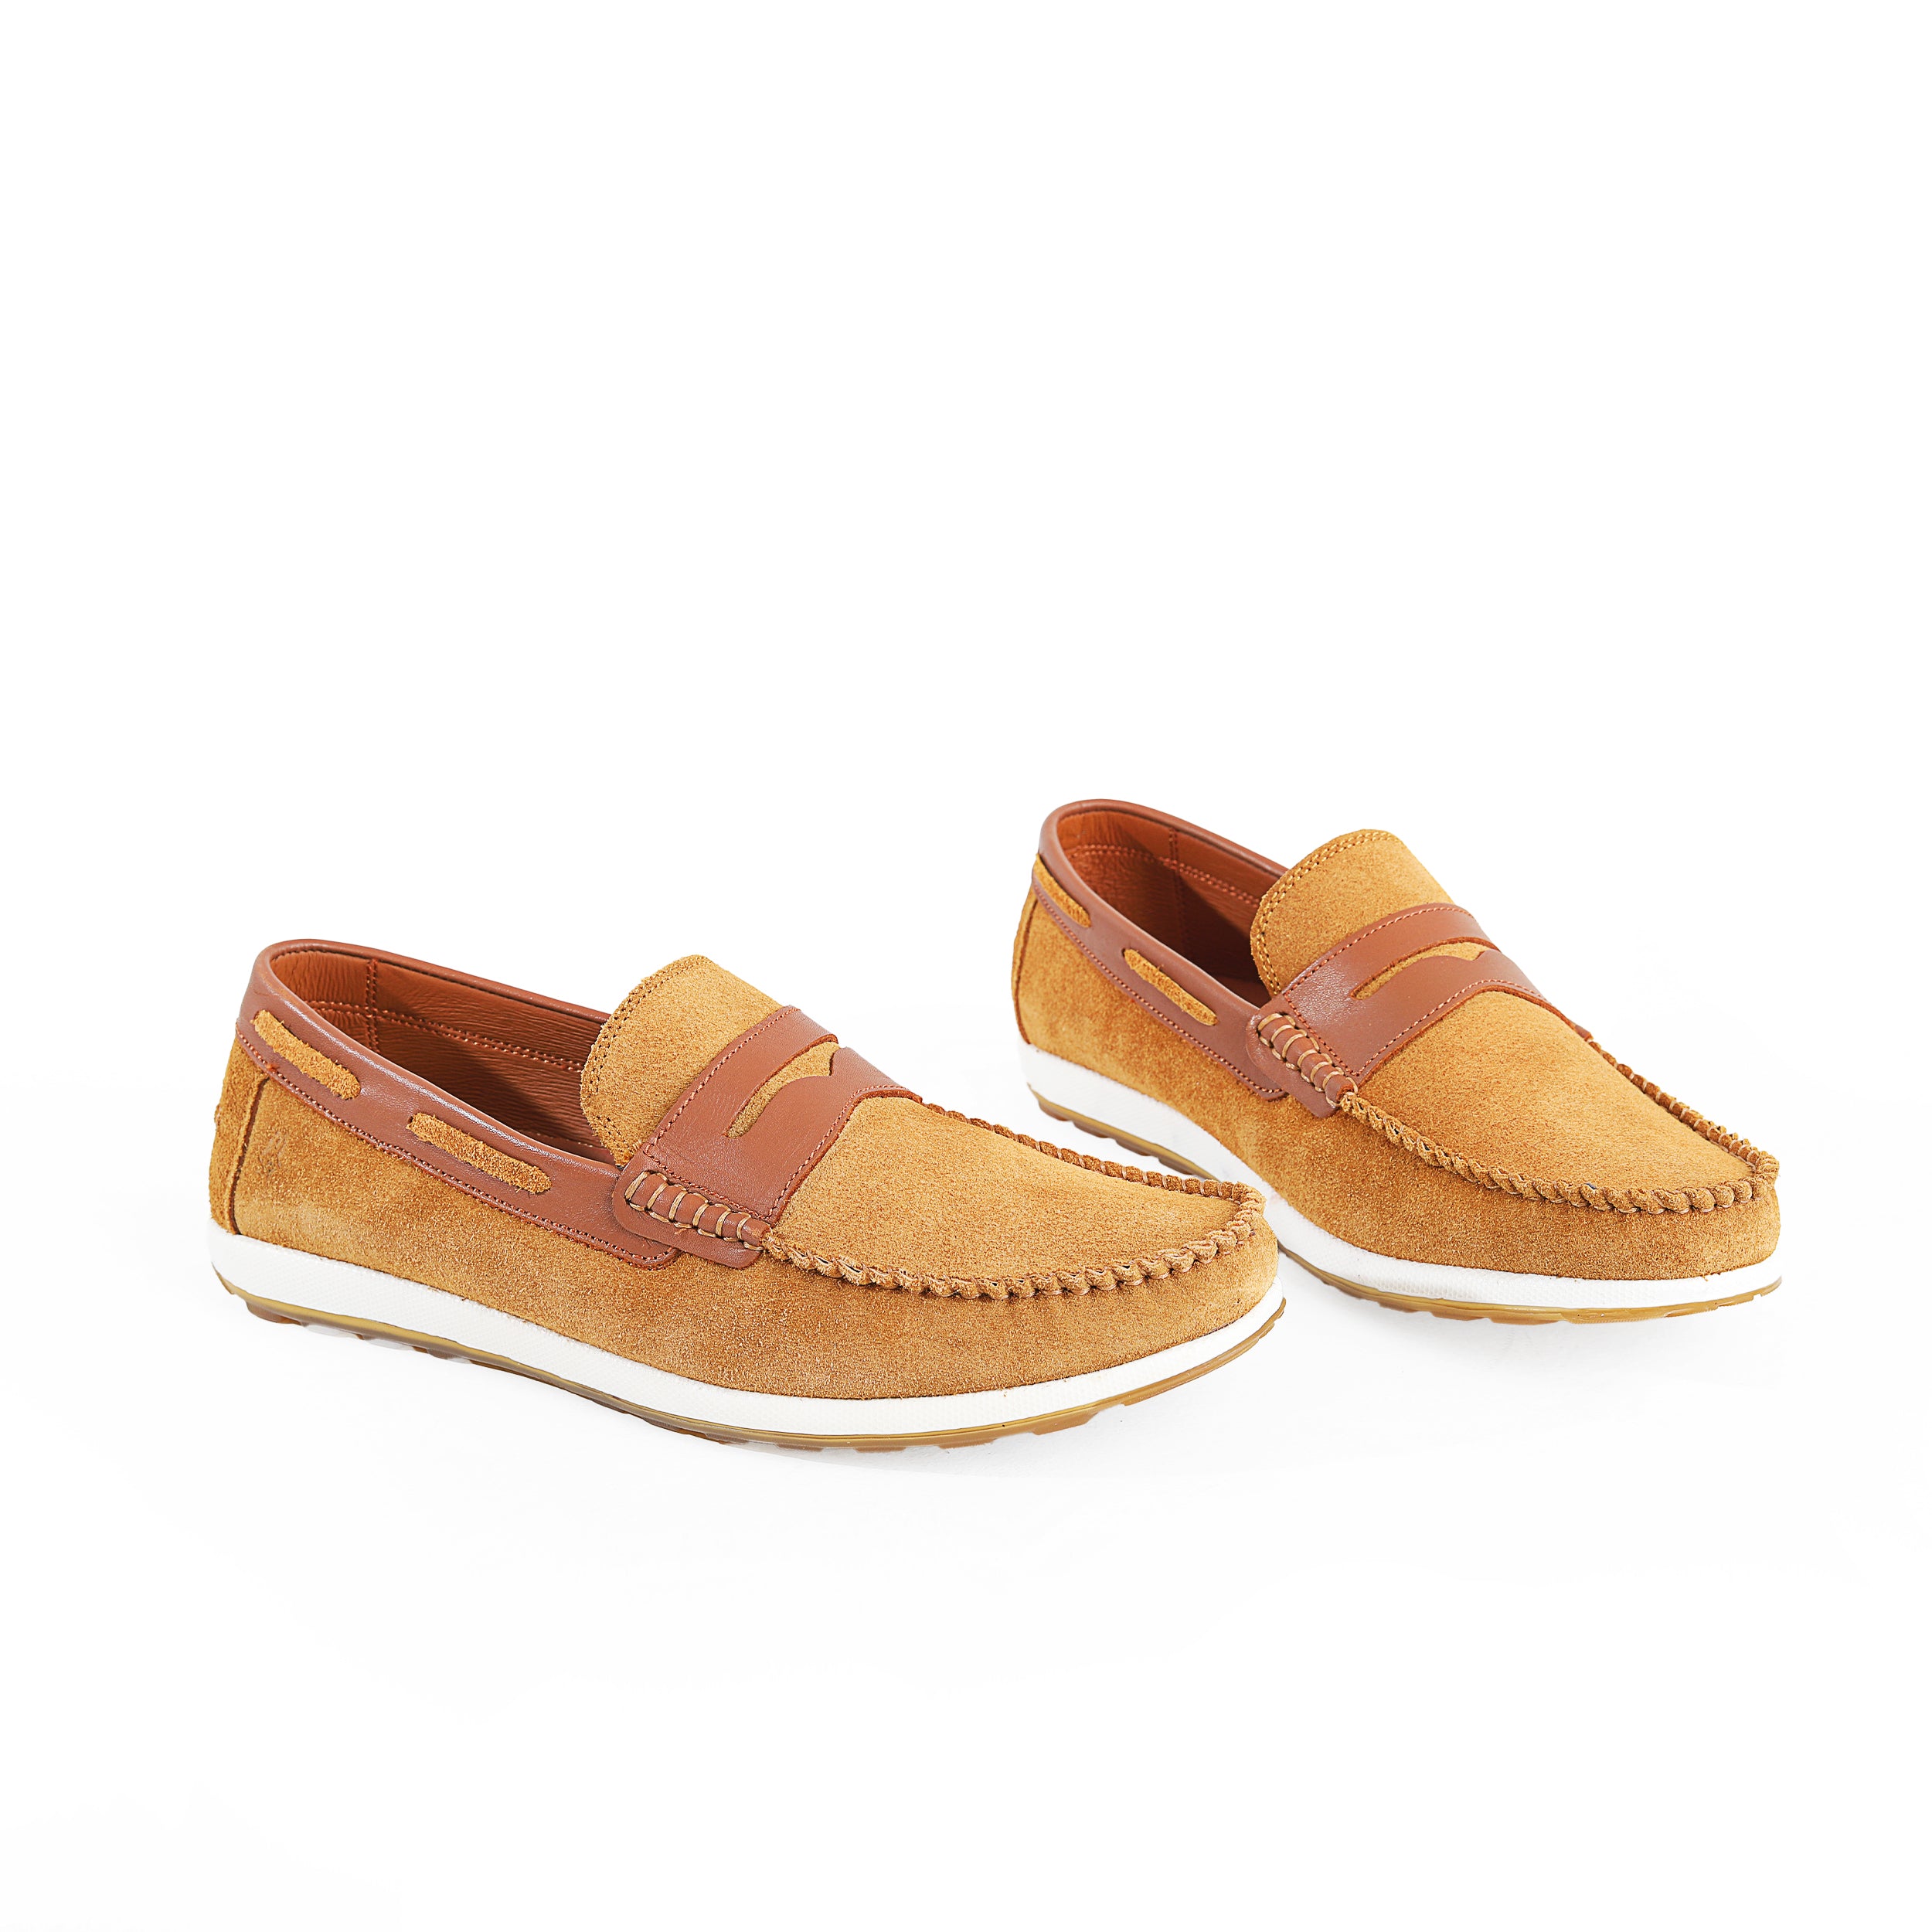 Hush Puppies Suede Loafers Shoes 506